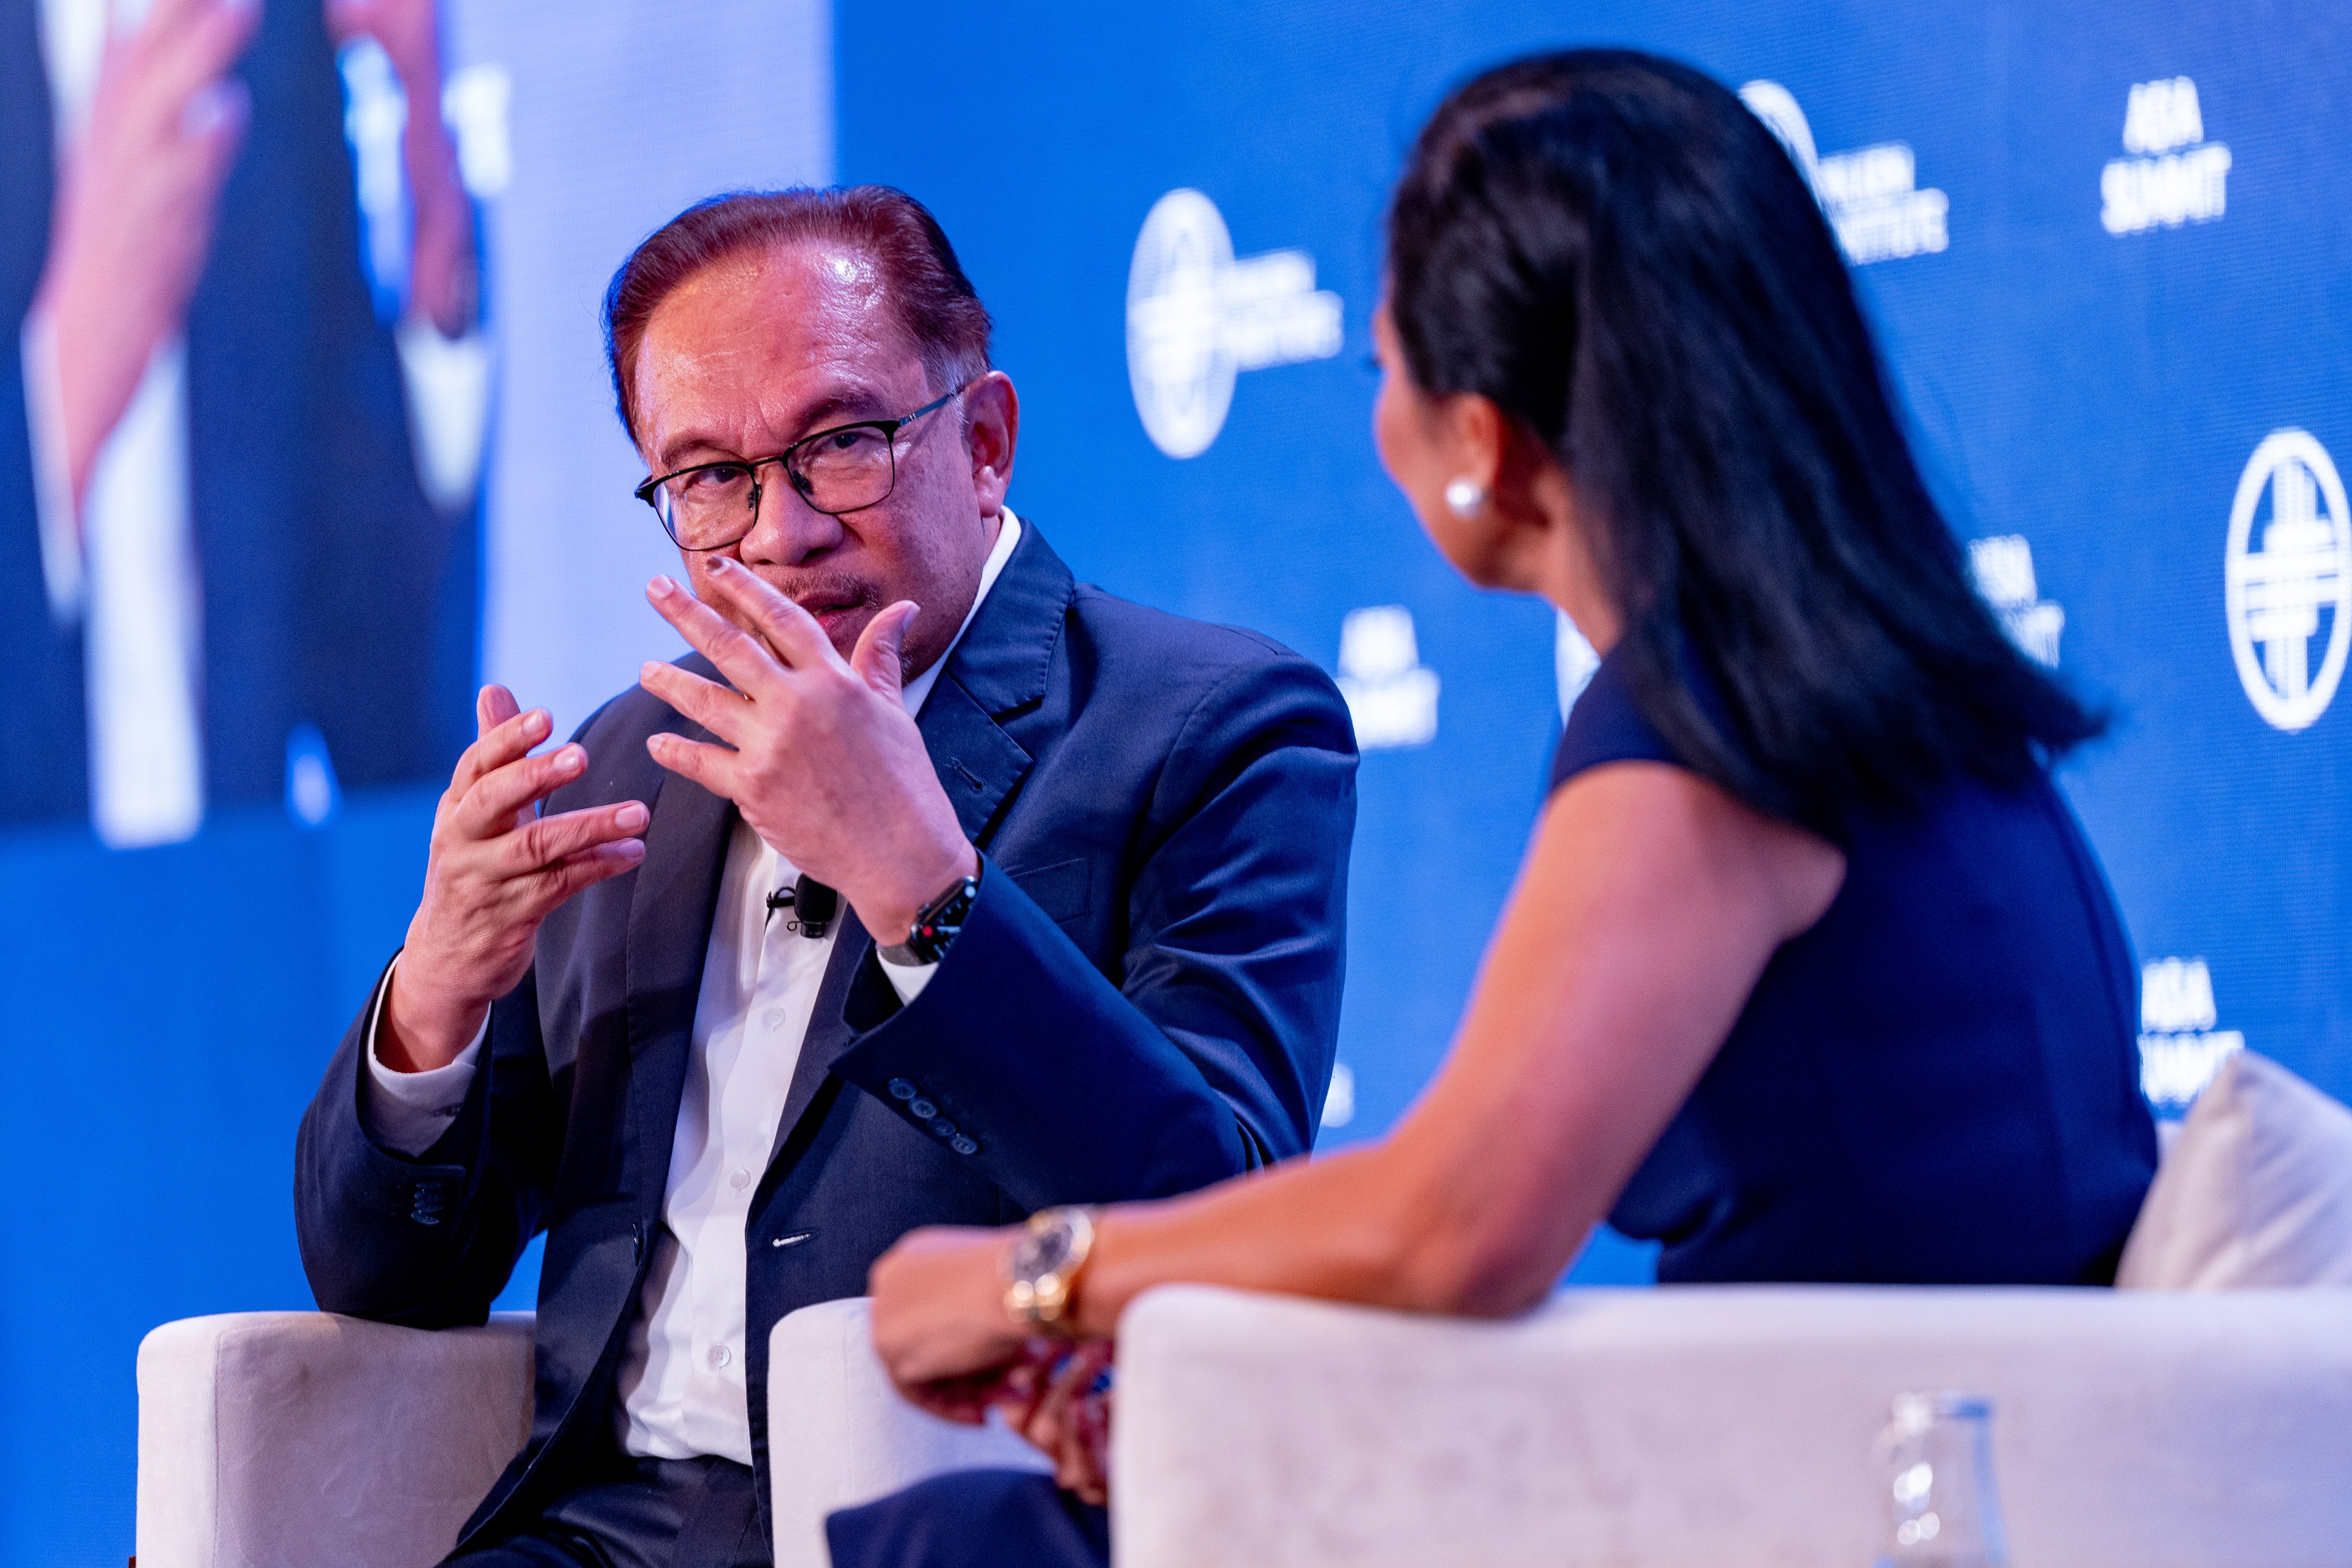 Malaysian Prime Minister Anwar Ibrahim speaks during a session at the Milken Institute’s 10th Asia Summit in Singapore on Wednesday. Photo: Prime Minister’s Office of Malaysia